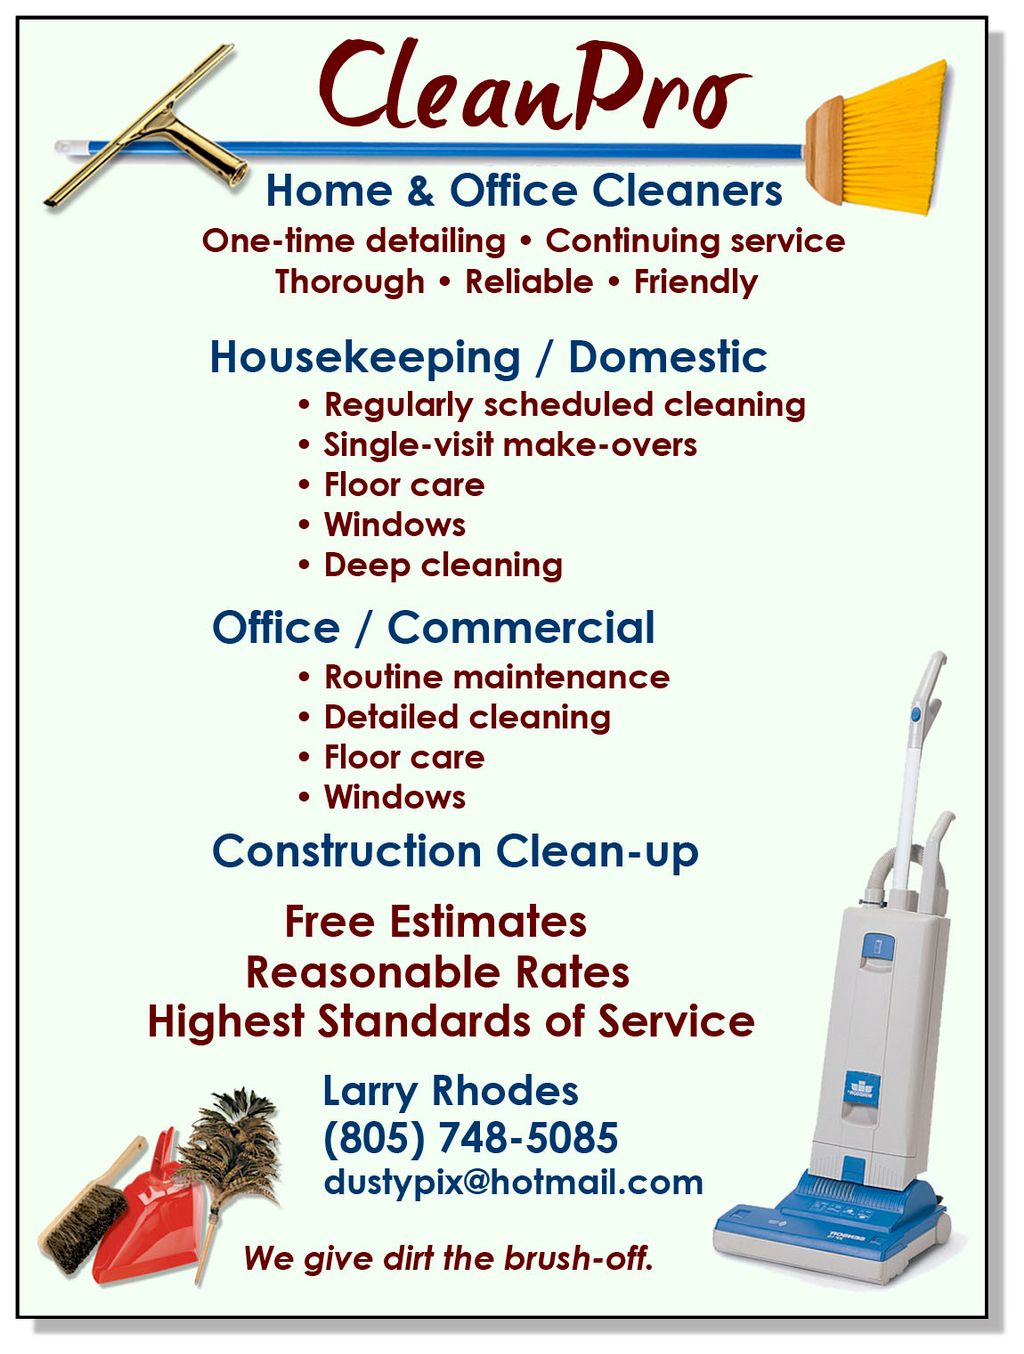 CleanPro Home and Office Cleaners